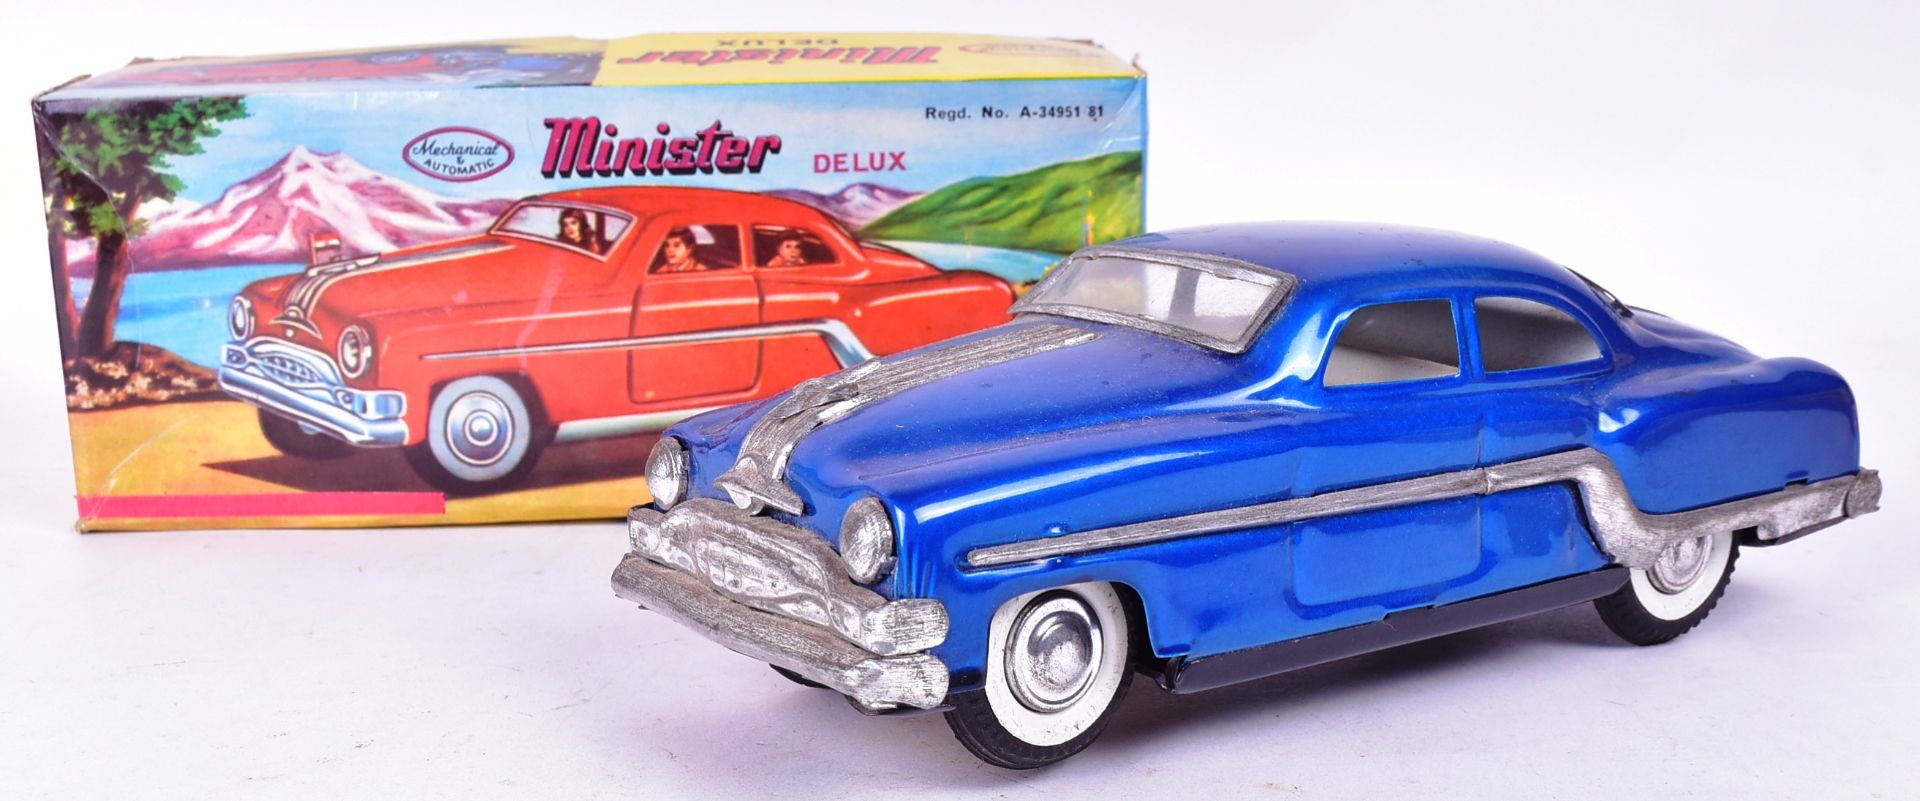 TINPLATE TOYS - X3 VINTAGE MINISTER DELUX TINPLATE TOY CARS - Image 3 of 5